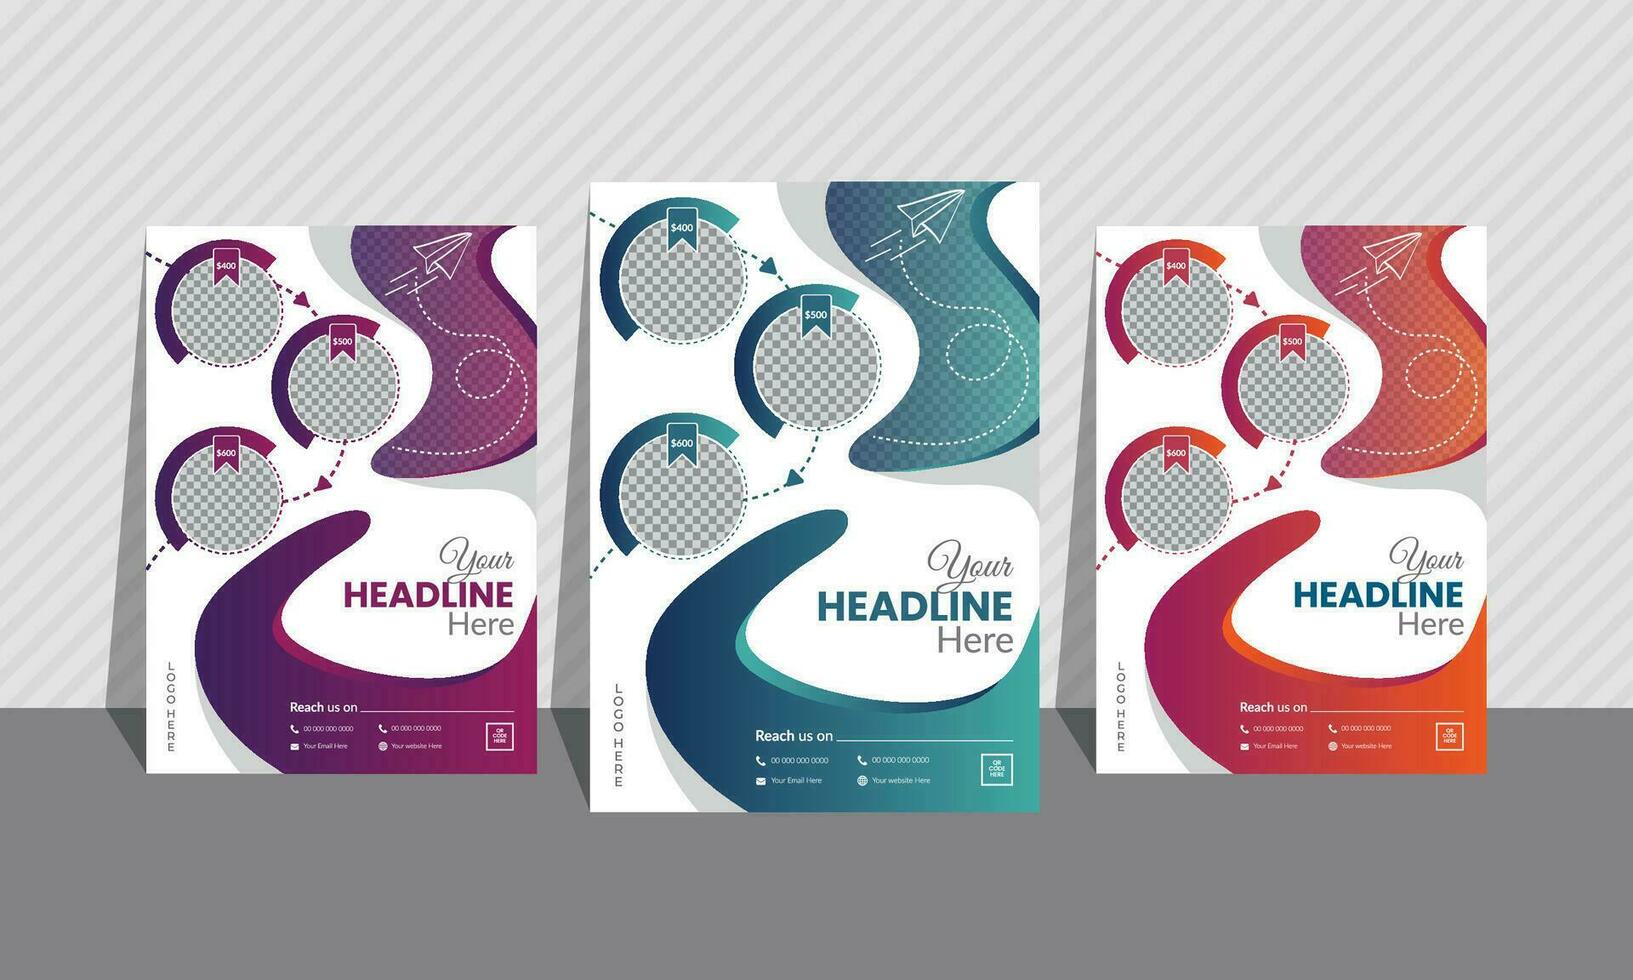 Travel and multipurpose flyer bundle of 3 gradient colors. Most unique curvy and geometric shapes, background image, and layout.A4 size. Pink, purple, green, ocean blue, orange. vector